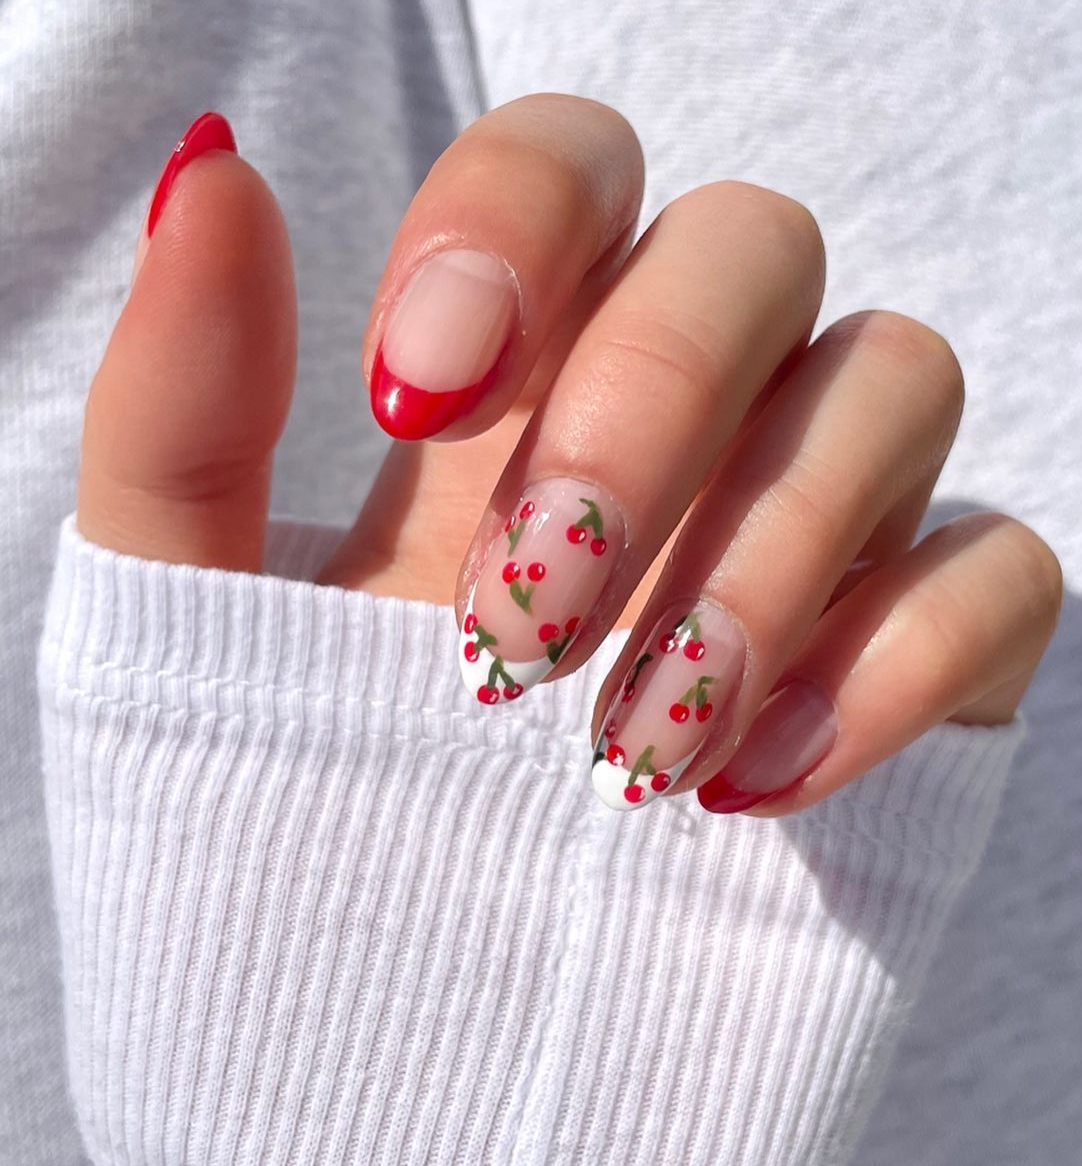 Short French Manicure with Cherry Design